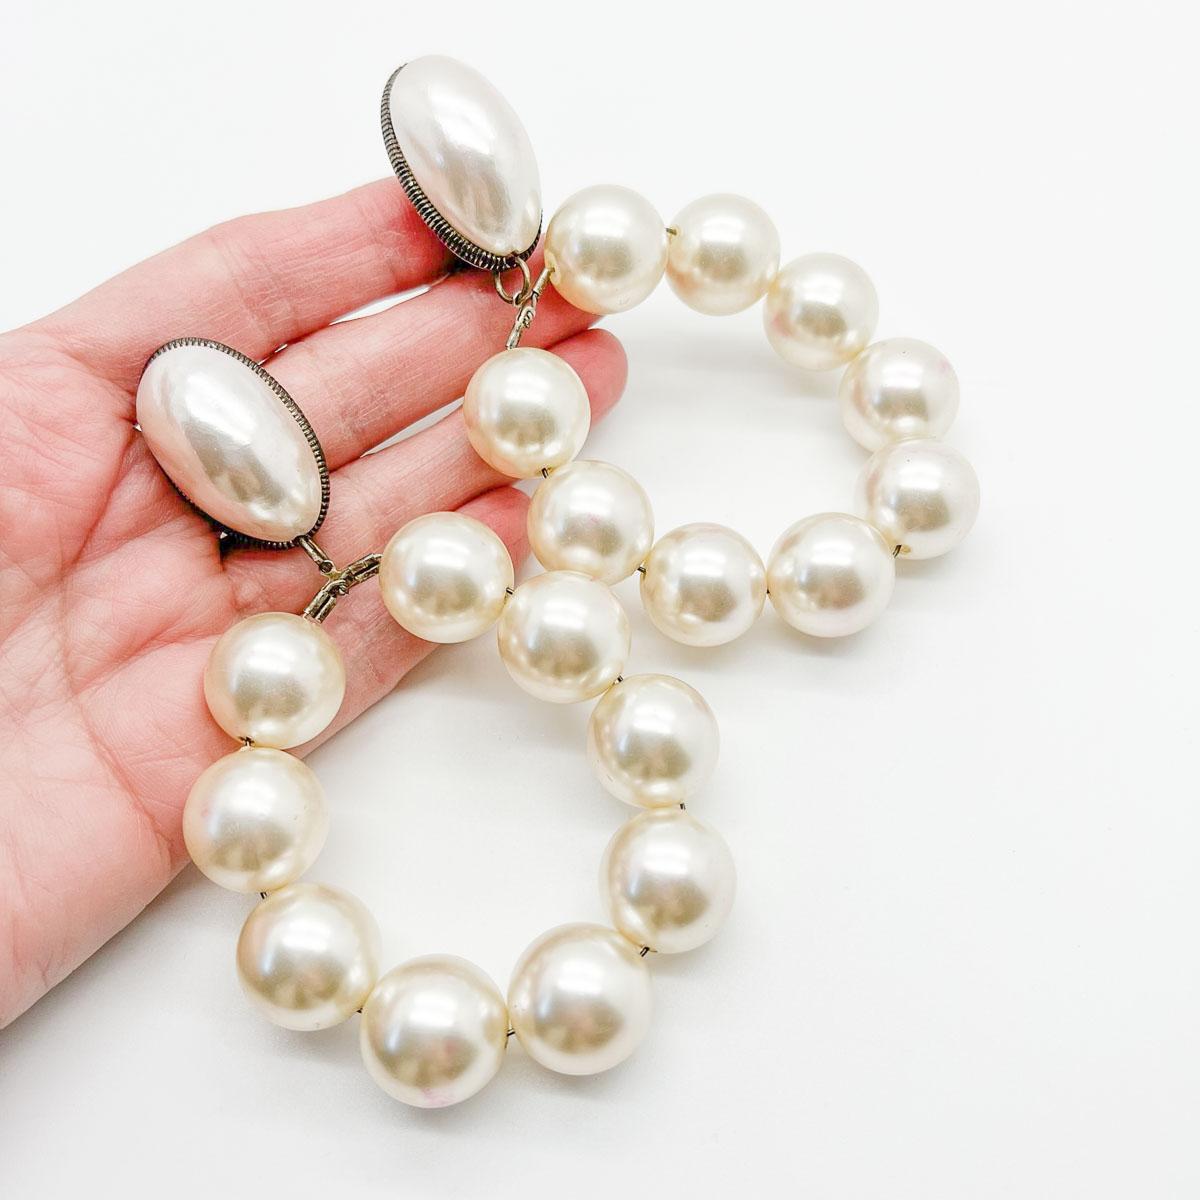 Nothing short of spectacular these Vintage Runway Pearl Hoop Earrings are the epitome of runway chic. Featuring mabé style pearl tops dropping away to nine large whole pearls set on a hoop. 
An unsigned beauty. A rare treasure. Just because a jewel